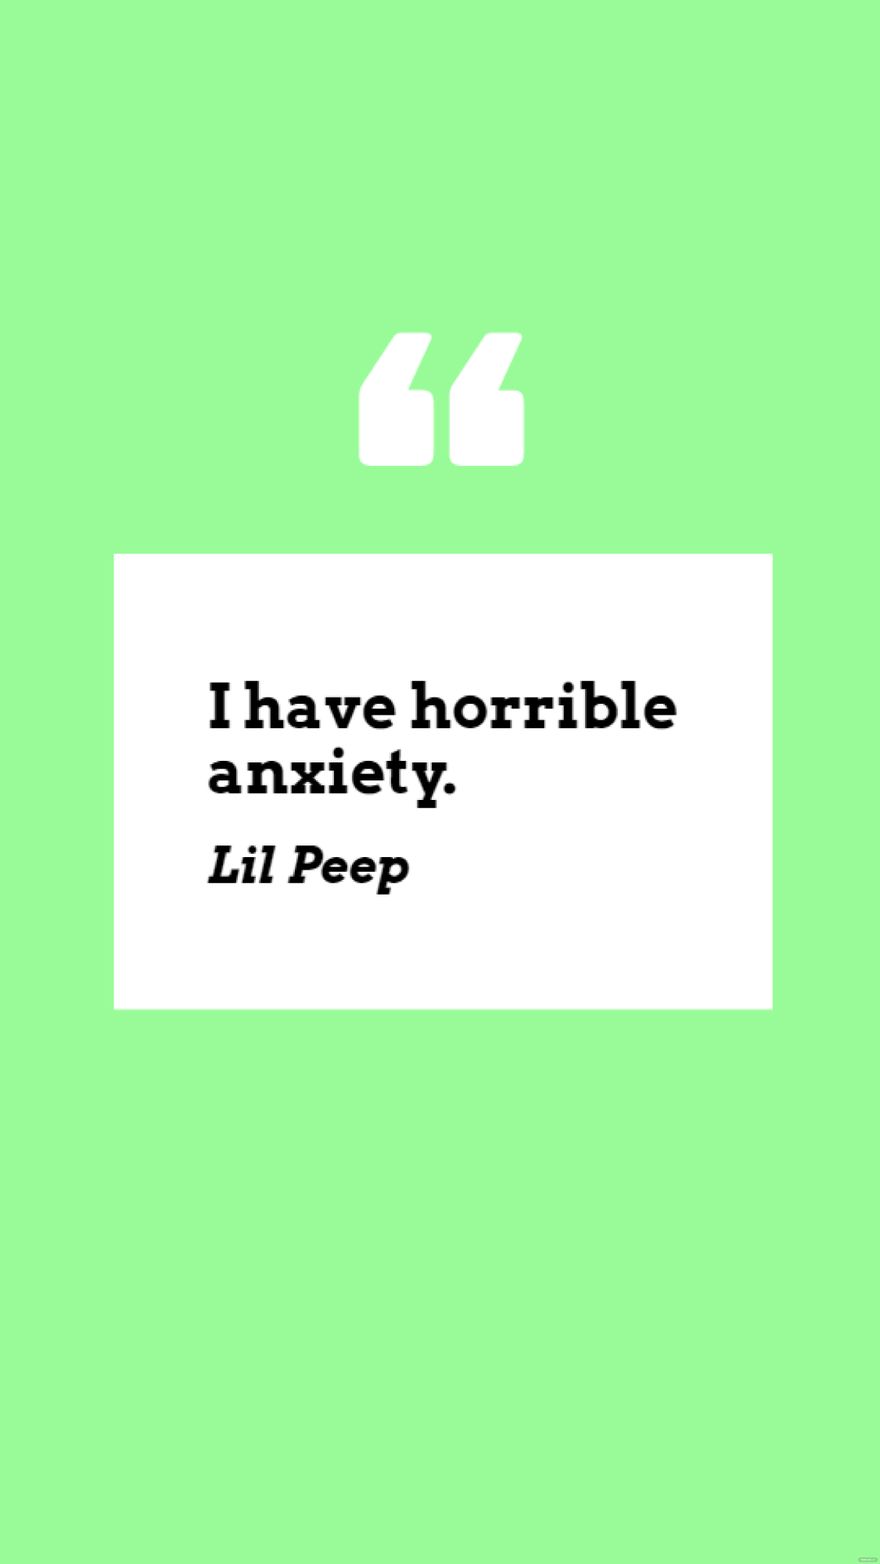 Free Lil Peep - I have horrible anxiety. in JPG